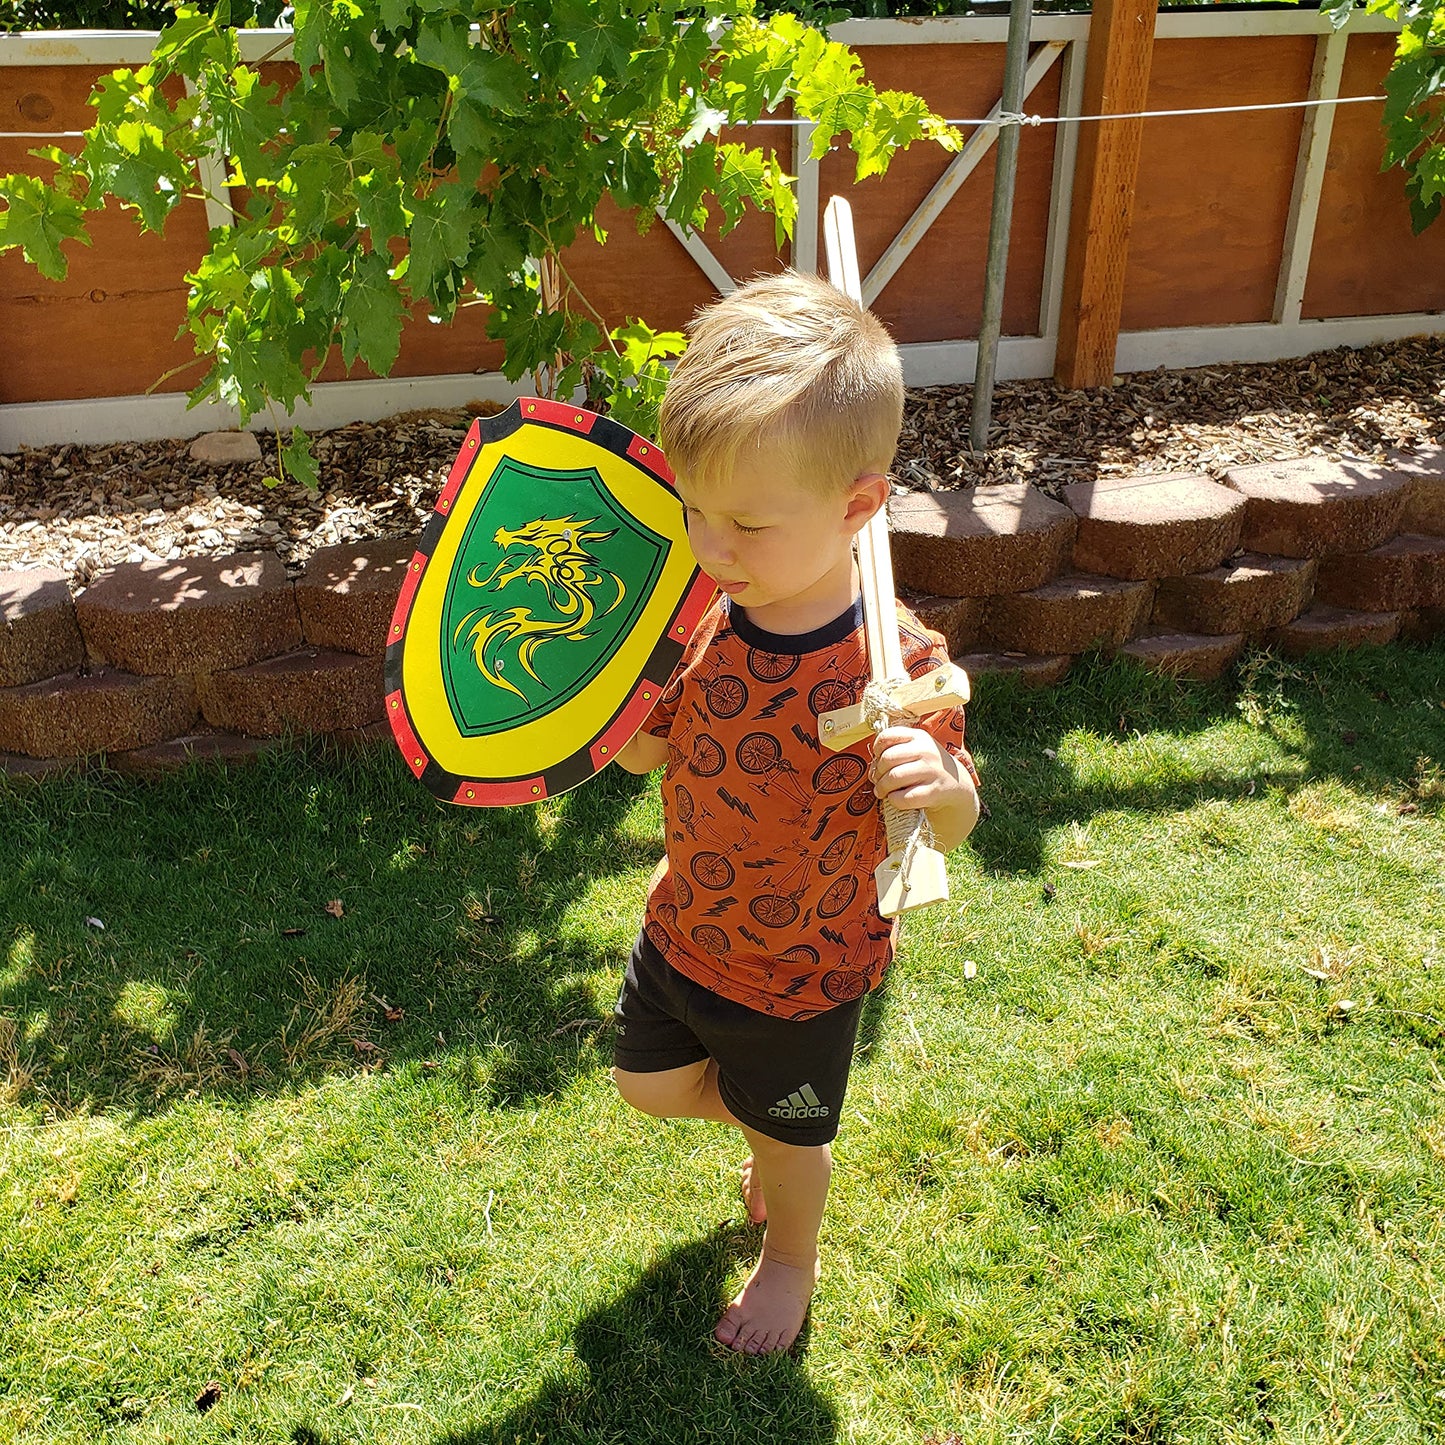 Adventure Awaits! - 2-Pack - Handmade Wooden Toy Dragon Shield - Handmade - Lightweight Wood Toy Shield Set for Outdoor Play